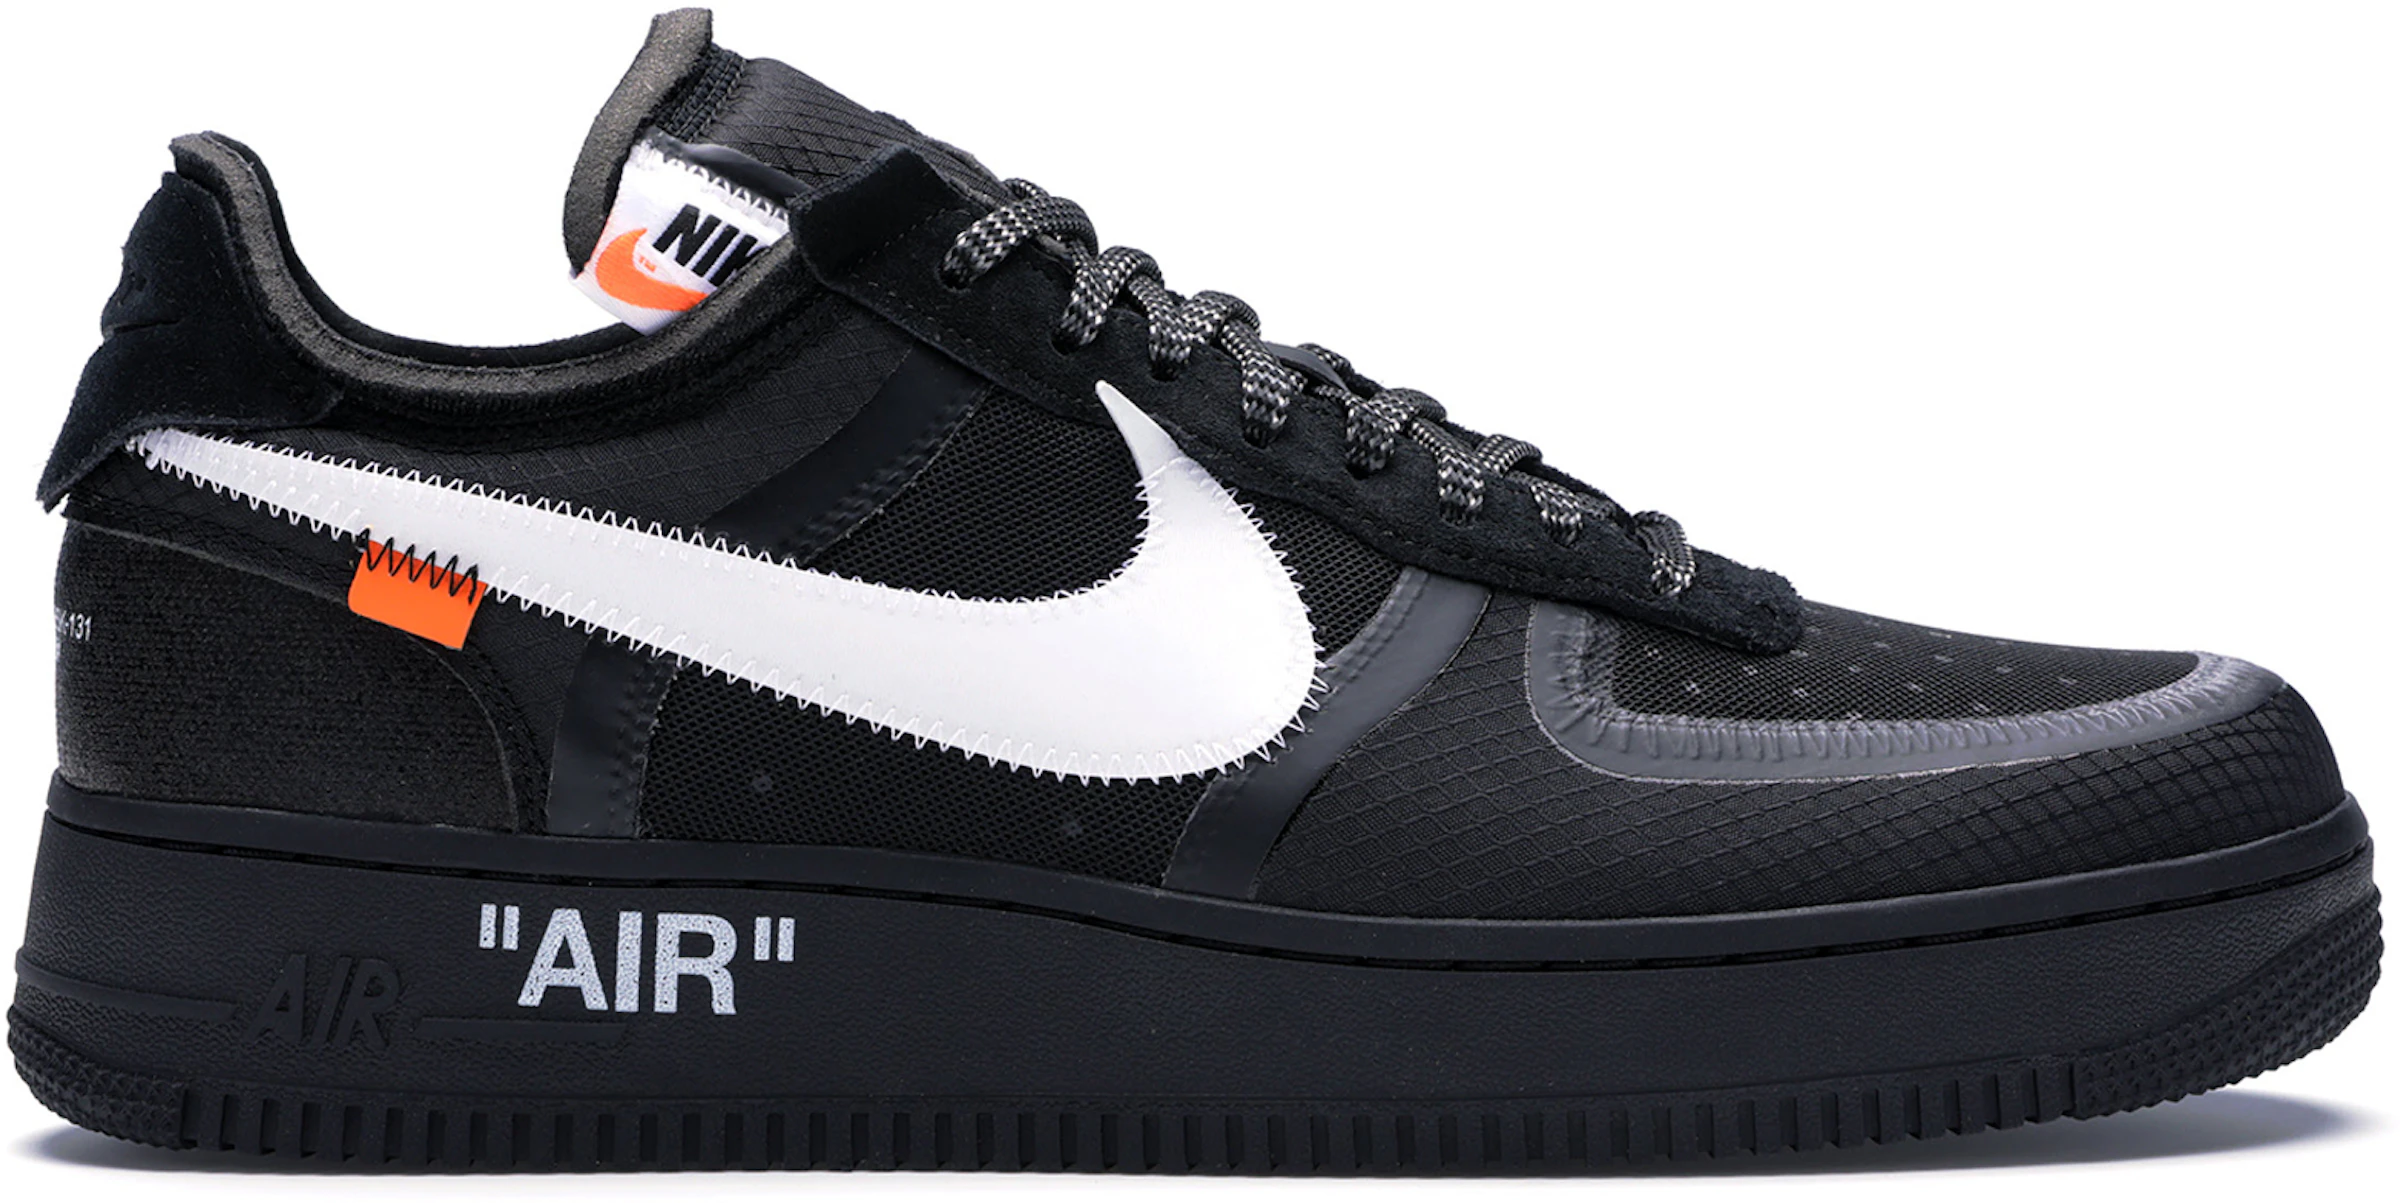 Nike Air Force Low Off-White Black White - AO4606-001 - US